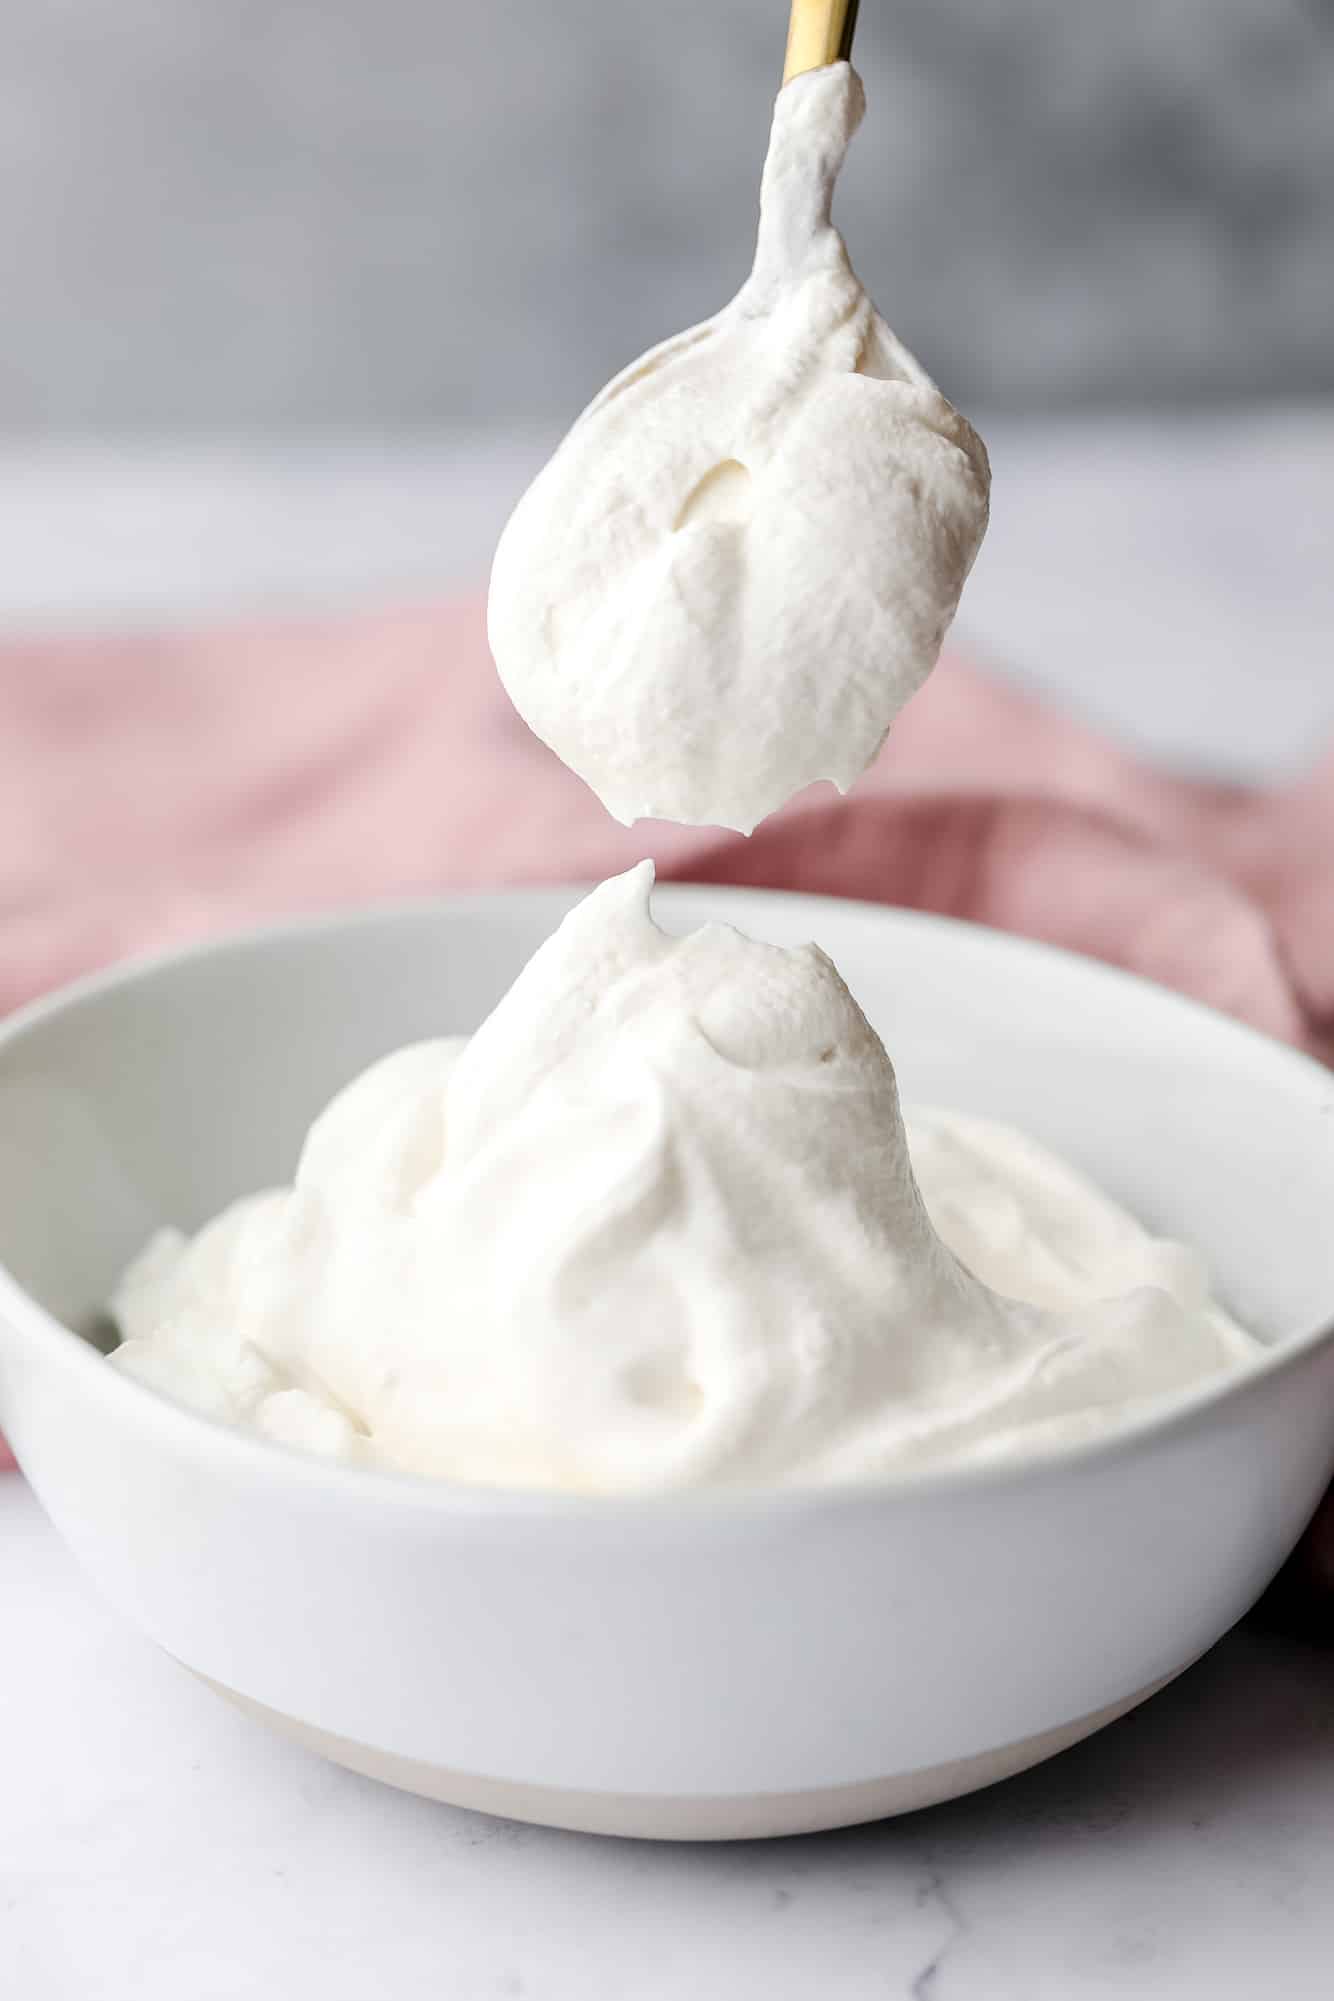 https://www.noracooks.com/wp-content/uploads/2022/04/heavy-whipping-cream-substitution-8.jpg